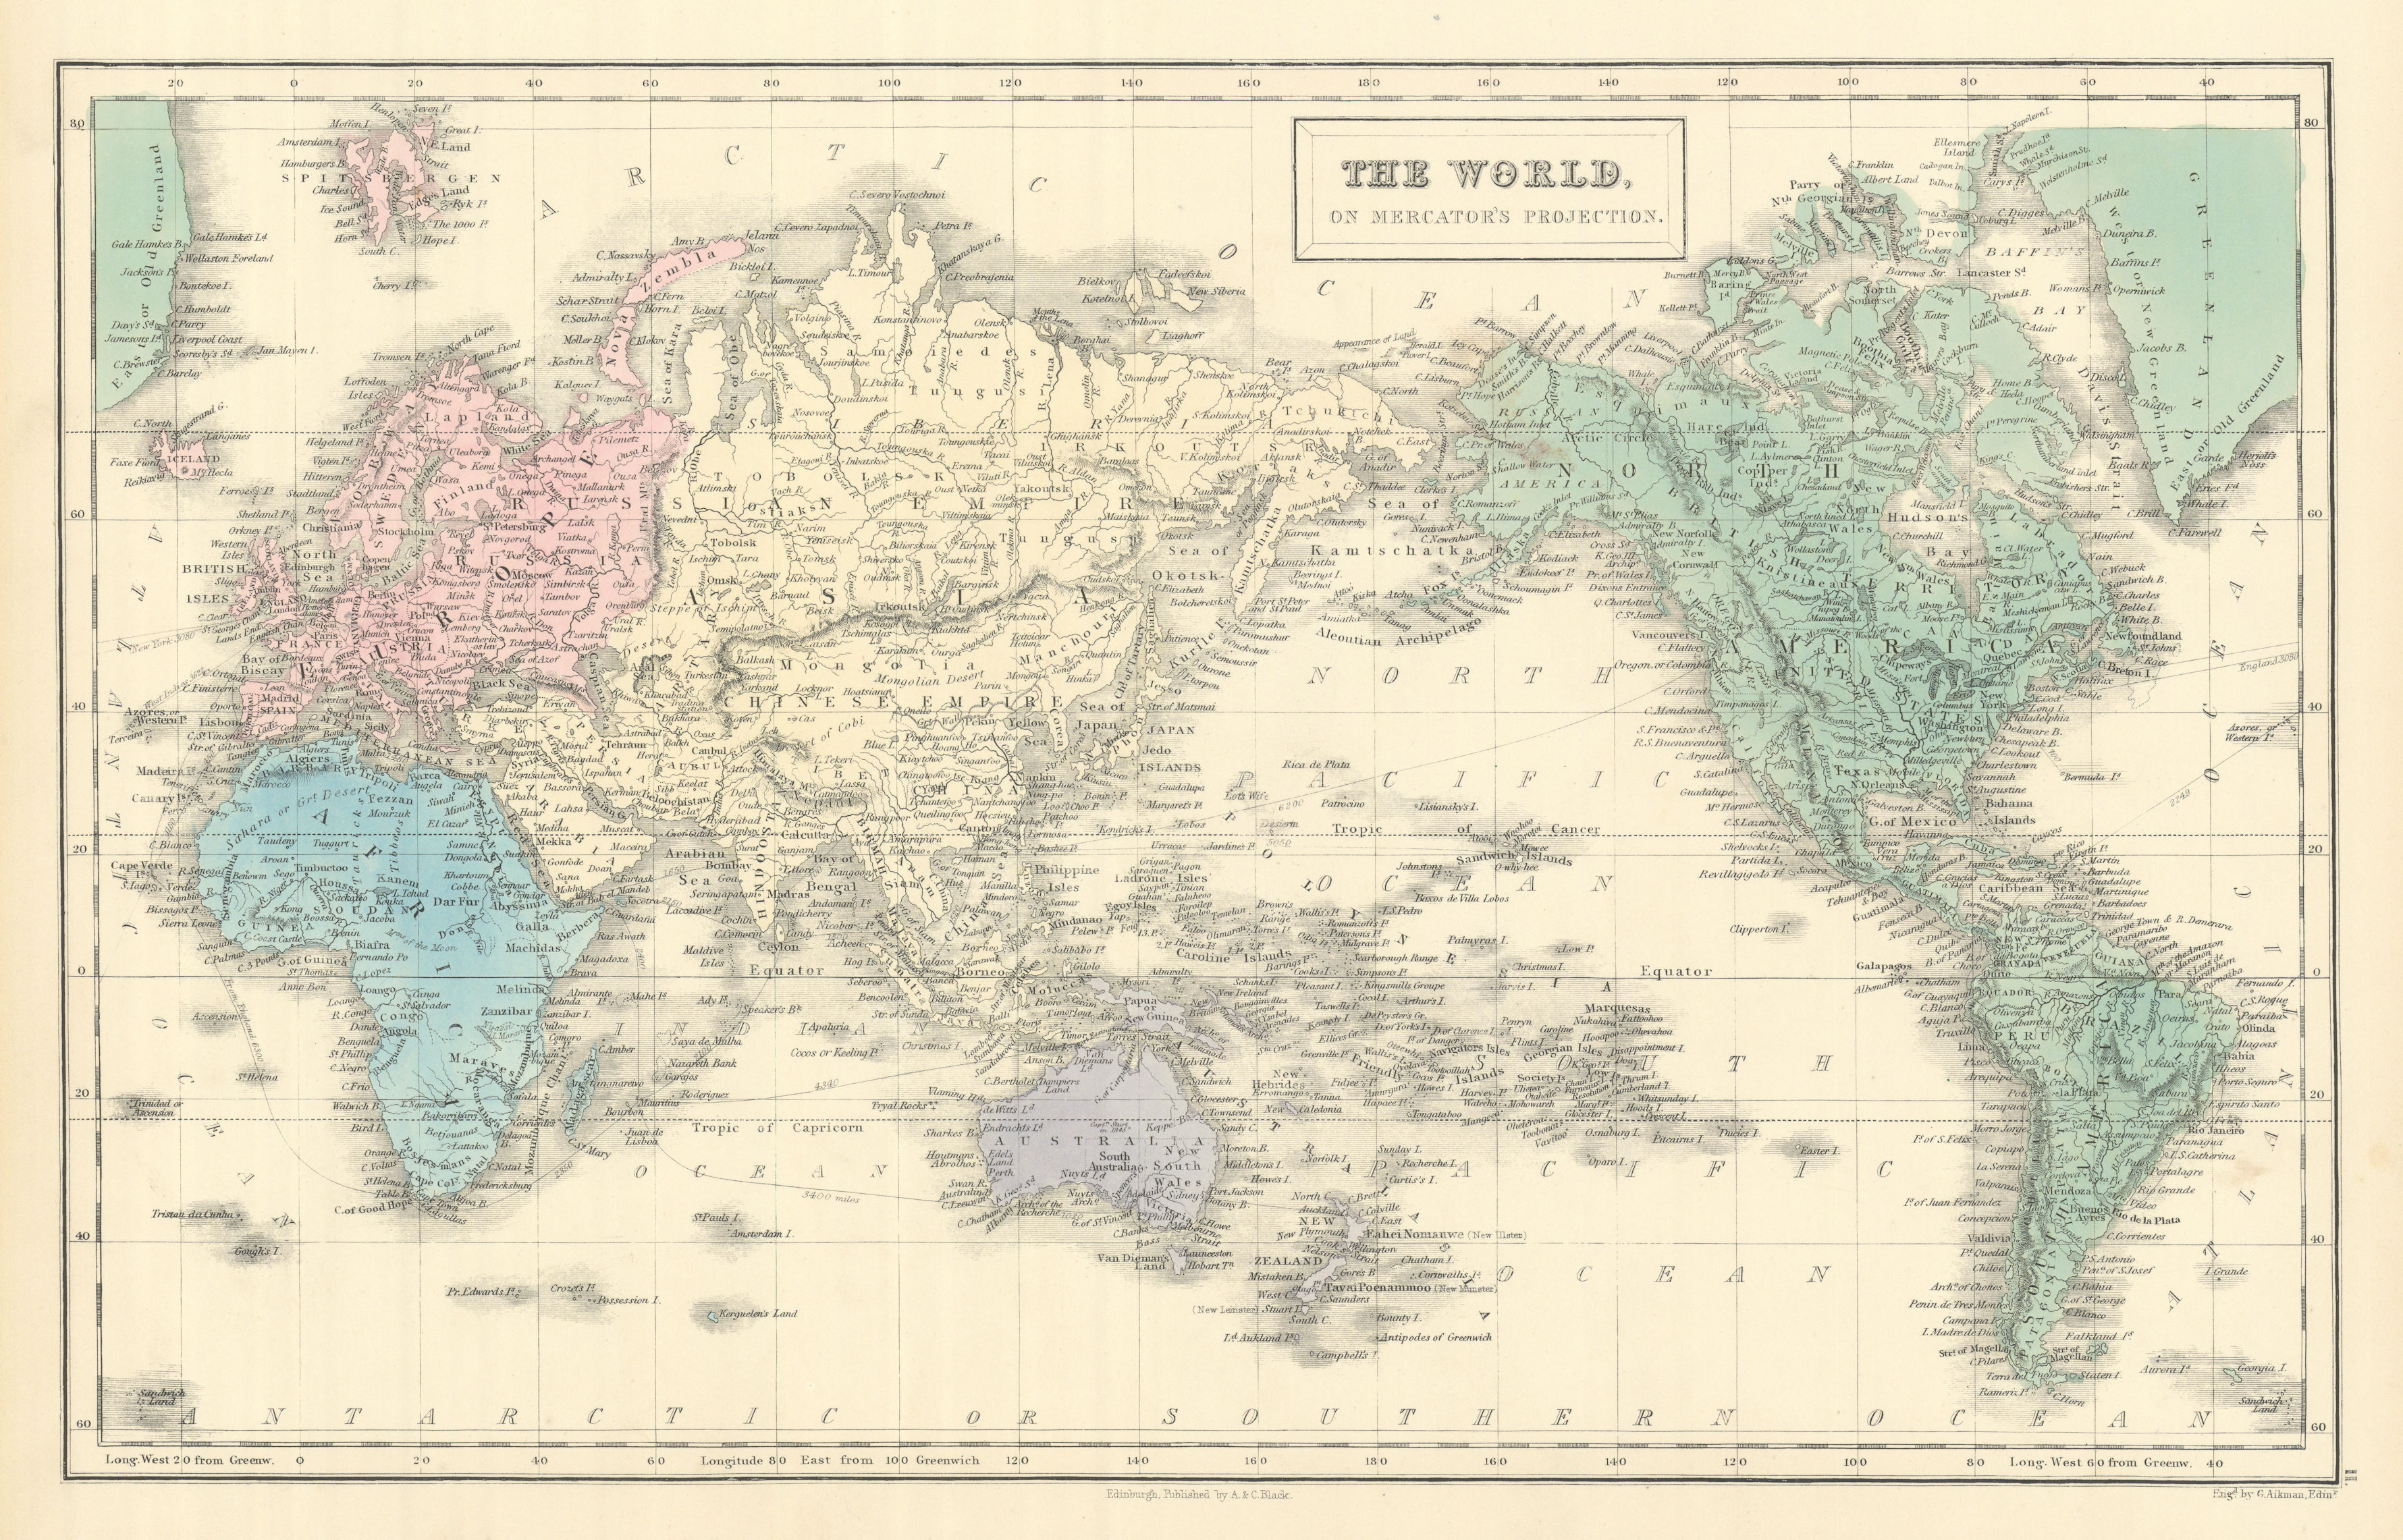 Associate Product The World, on Mercator's projection by GEORGE AIKMAN. Asia-centric 1854 map